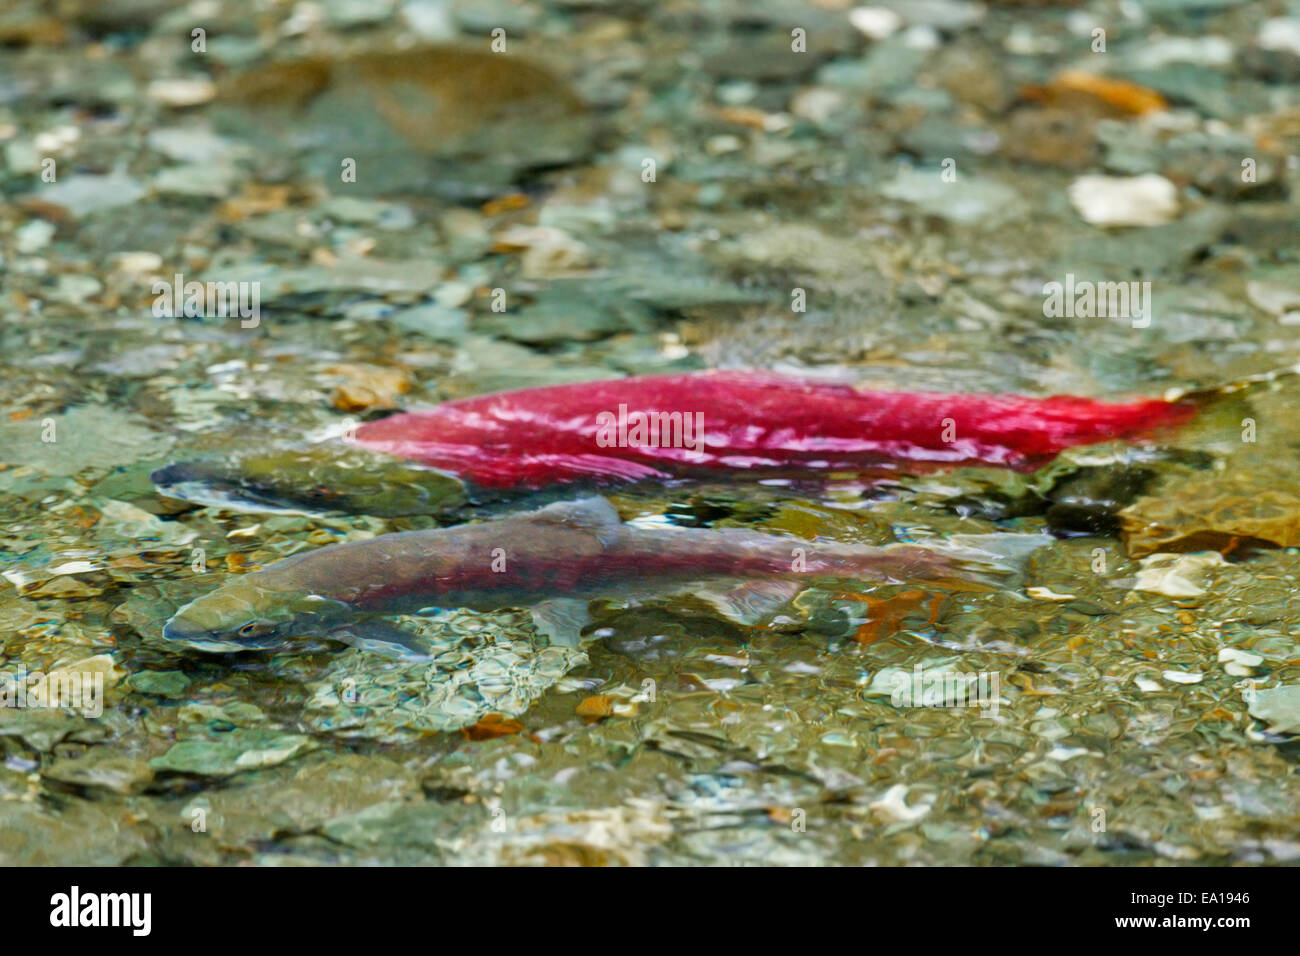 A male red Sockeye Salmon guards a female after digging a redd in its spawning site, Tongass National Forest, Southeast Alaska Stock Photo